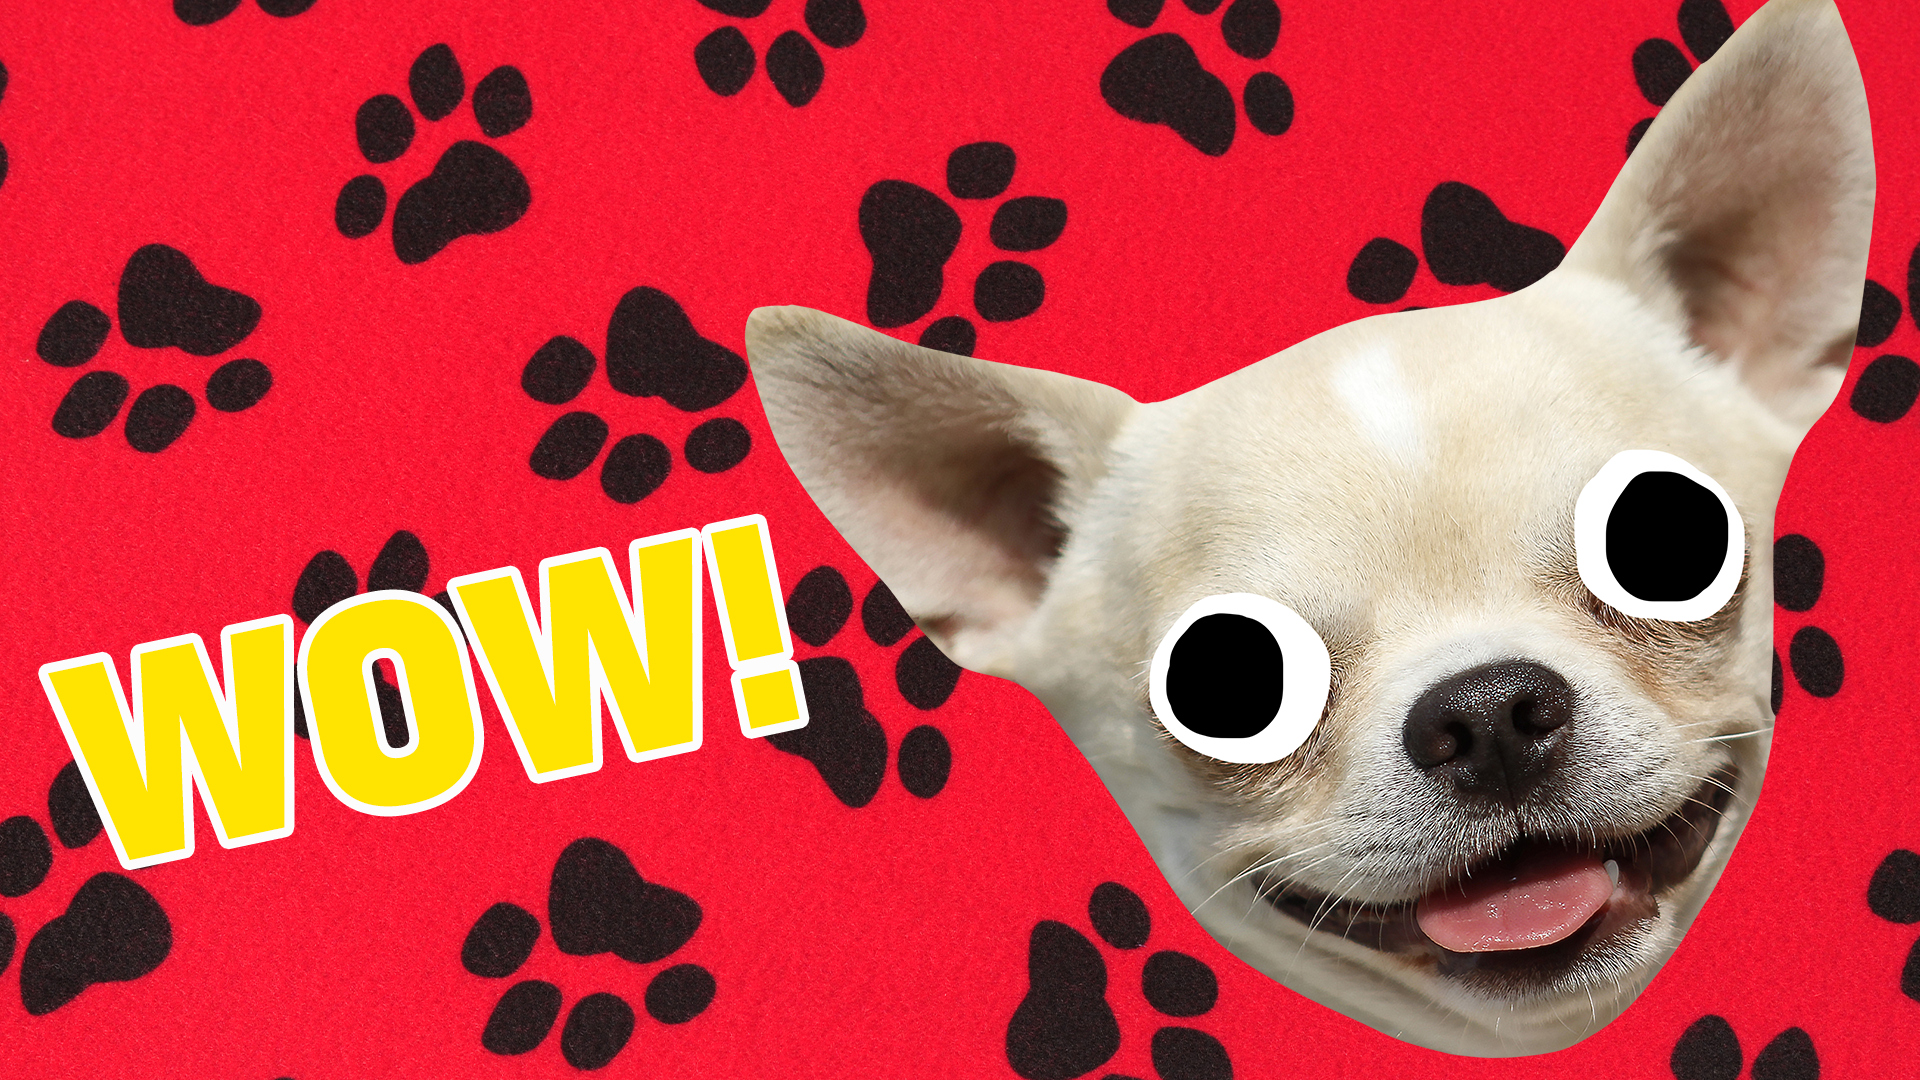 Woah! You're officially the dog breed champion because you got 10/10 on the quiz! Congrats! 